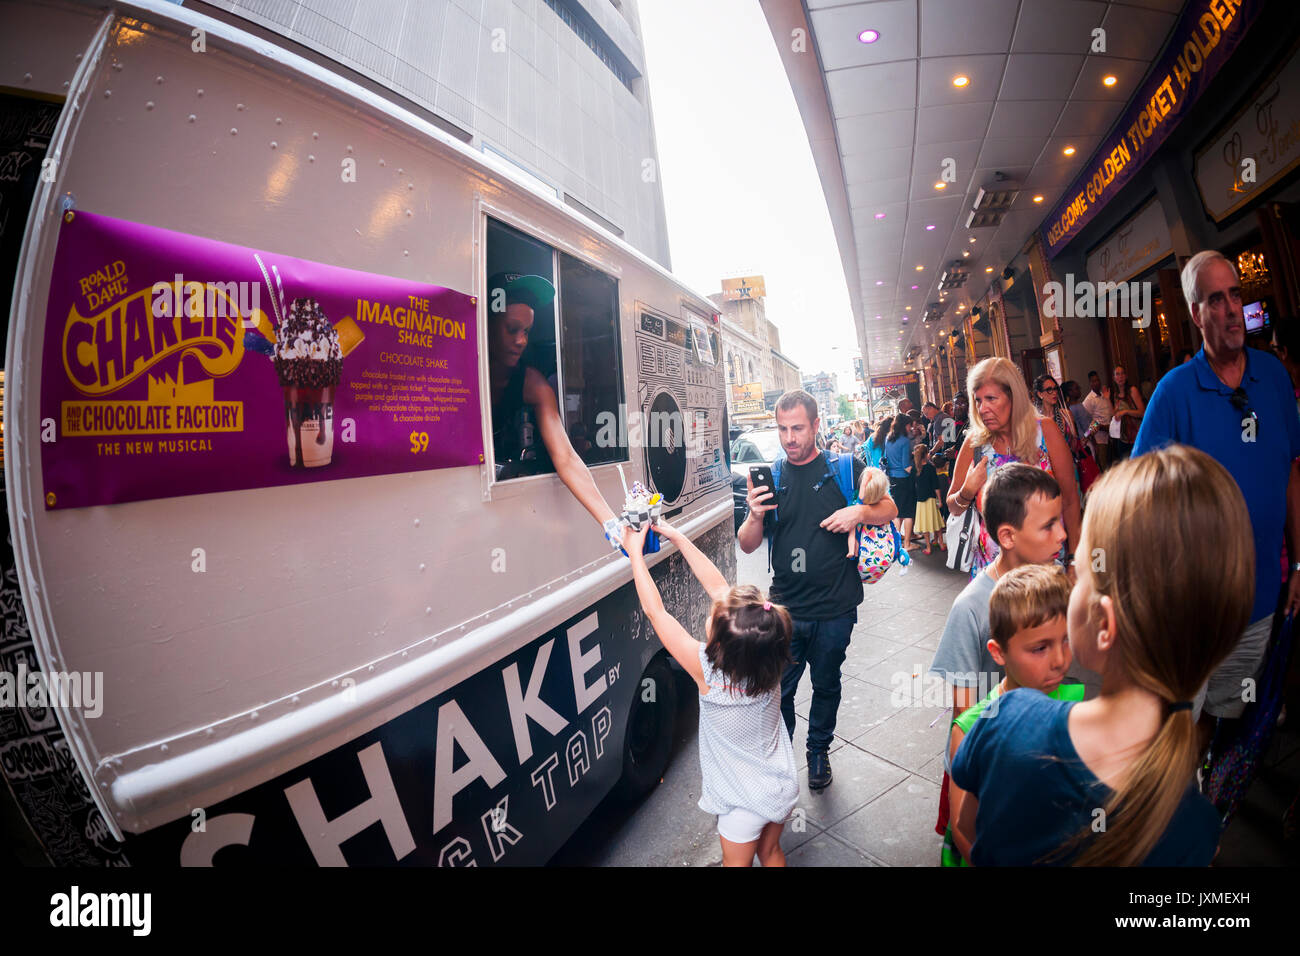 Theatre-goers exiting the Lunt-Fontanne Theatre on Broadway in New York on Wednesday, August 9, 2017 excitedly buy an 'Imagination Shake' from the Shake by Black Tap milkshake truck. The collaboration between the Roald Dahl 'Charlie and the Chocolate Factory' musical and and the Black Tap is an over-sized shake with purple and gold rock candies, whipped cream, chocolate chips, chocolate drizzle topped with a chocolate'golden ticket' as in the musical. Perfect for an after matinee indulgent. The truck will appear after matinees through September. (© Richard B. Levine) Stock Photo